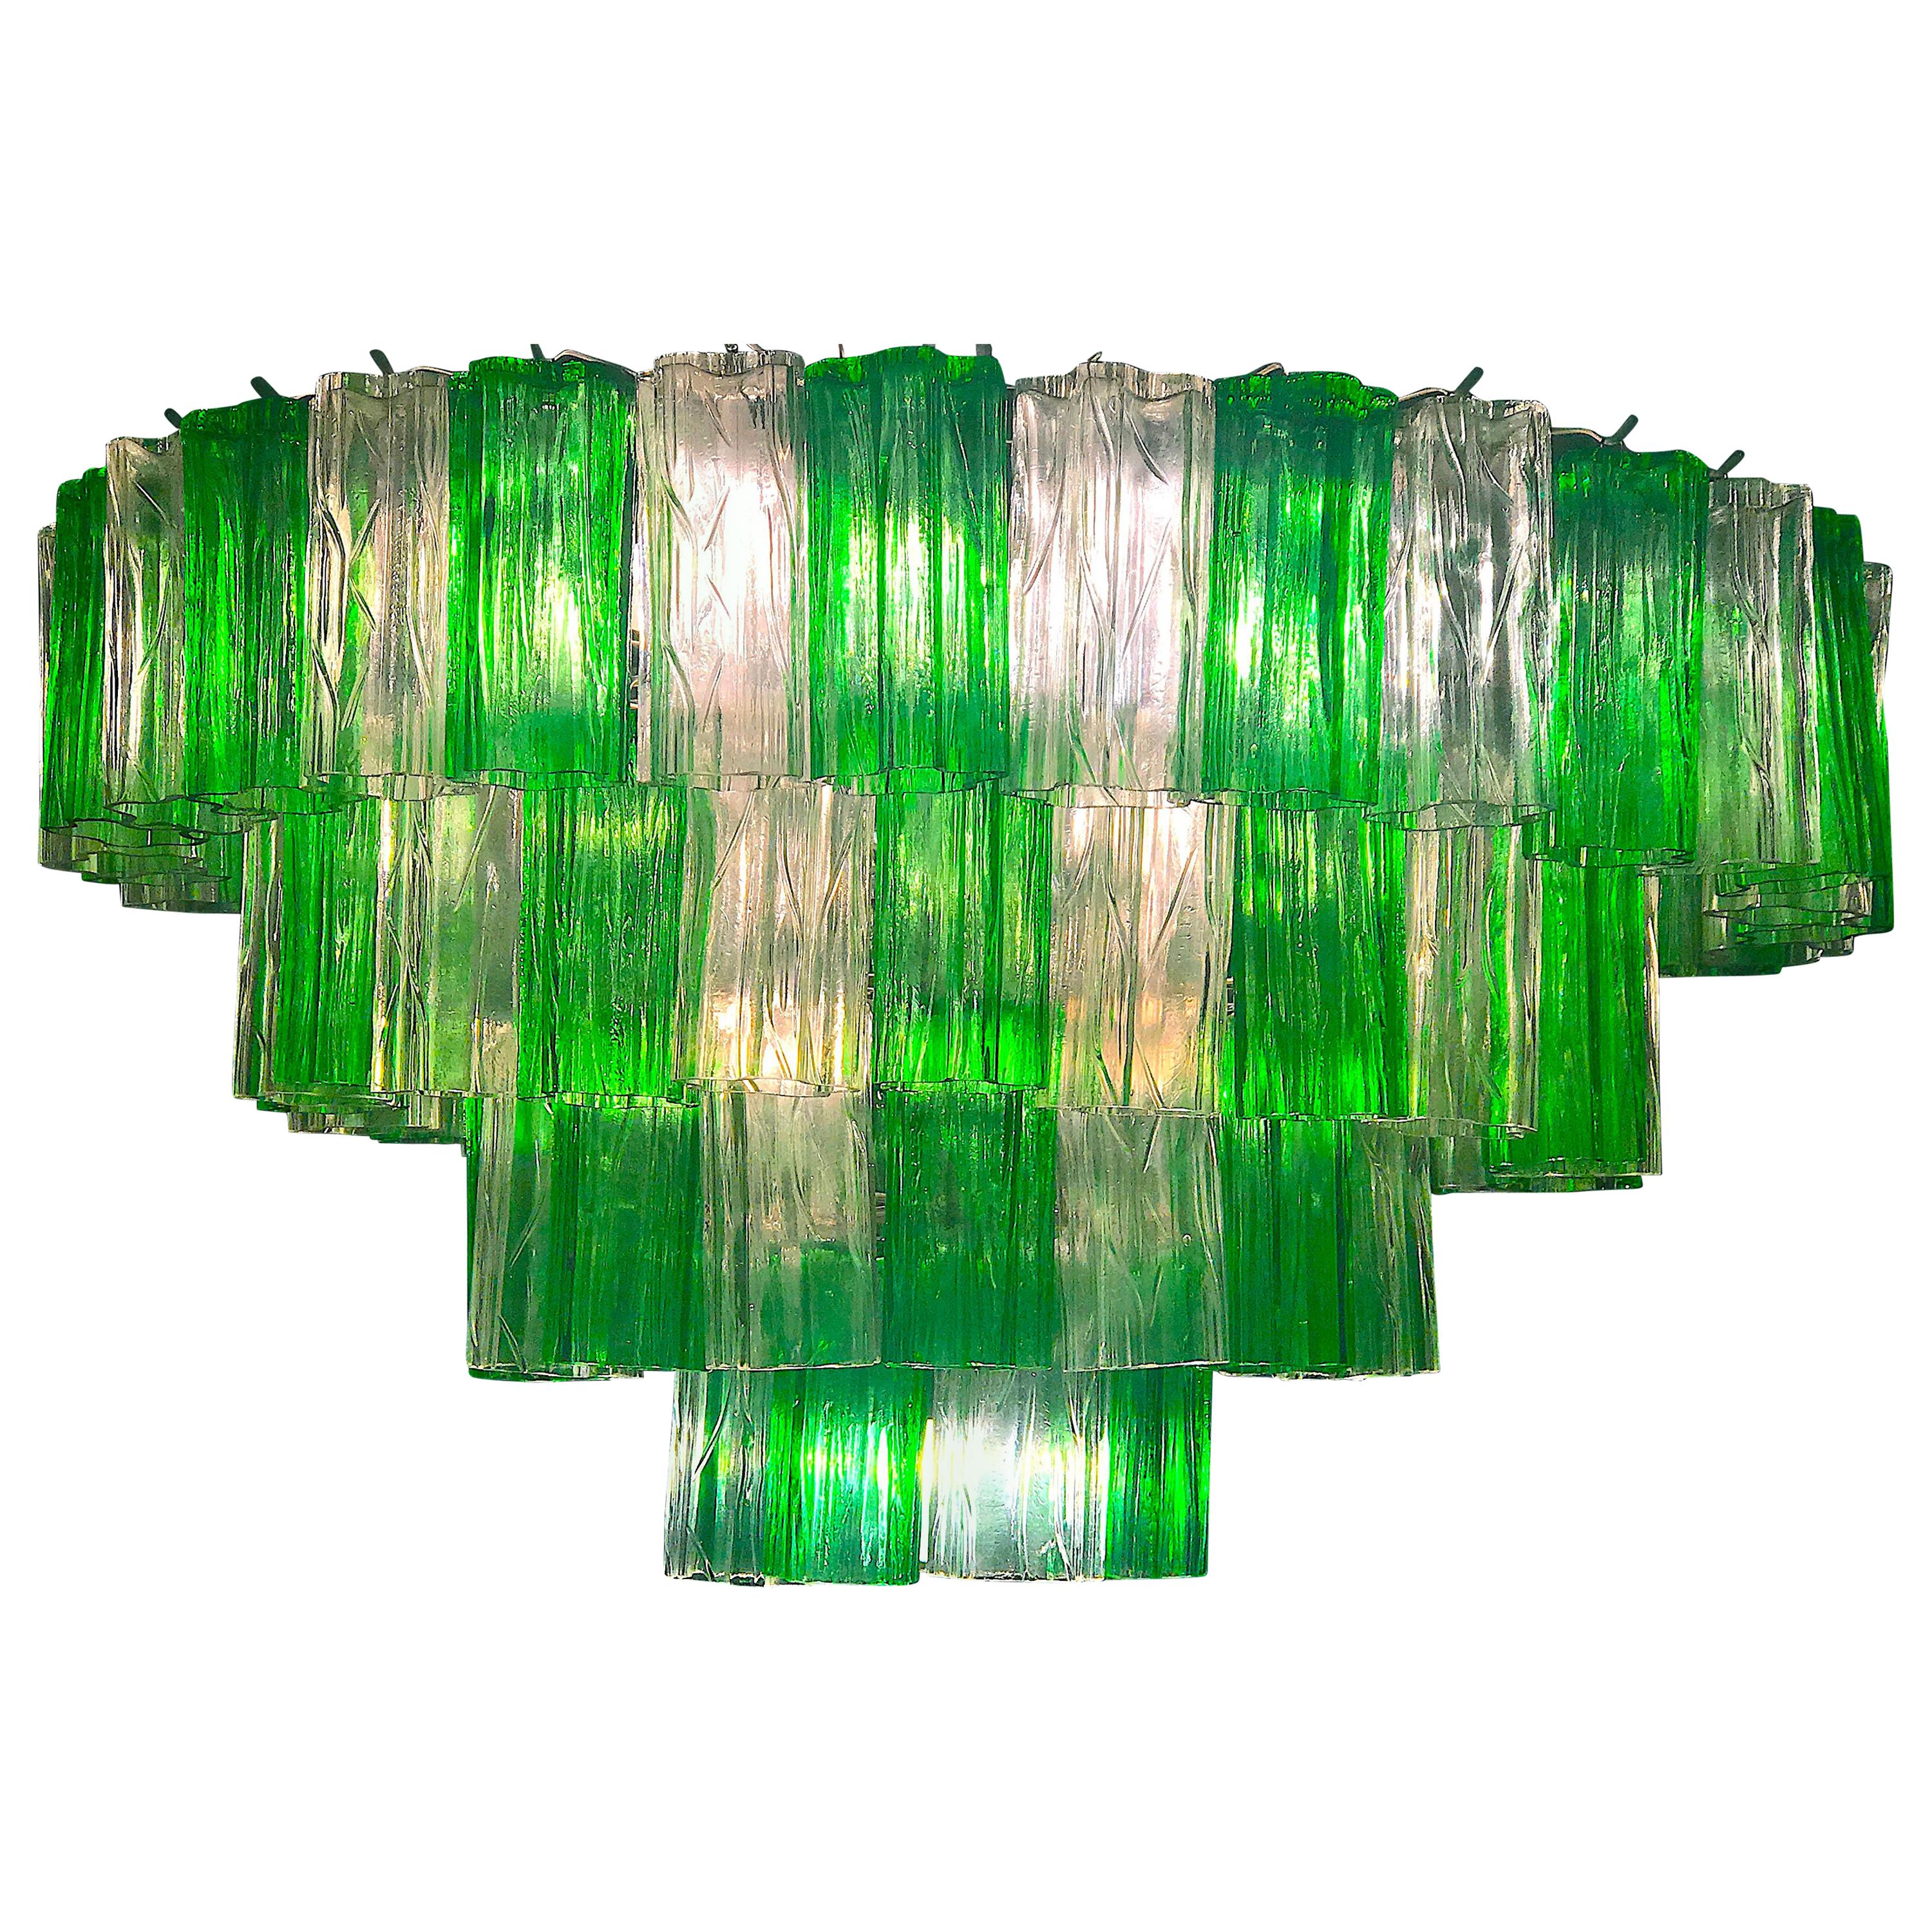 This outstanding chandelier with rare color combination considering the uniqueness with Emerald and ice color precious Murano glasses. Each chandelier with 80 Original glass blown elements supported by a chrome frame.
12 E 14 light bulbs. Excellent